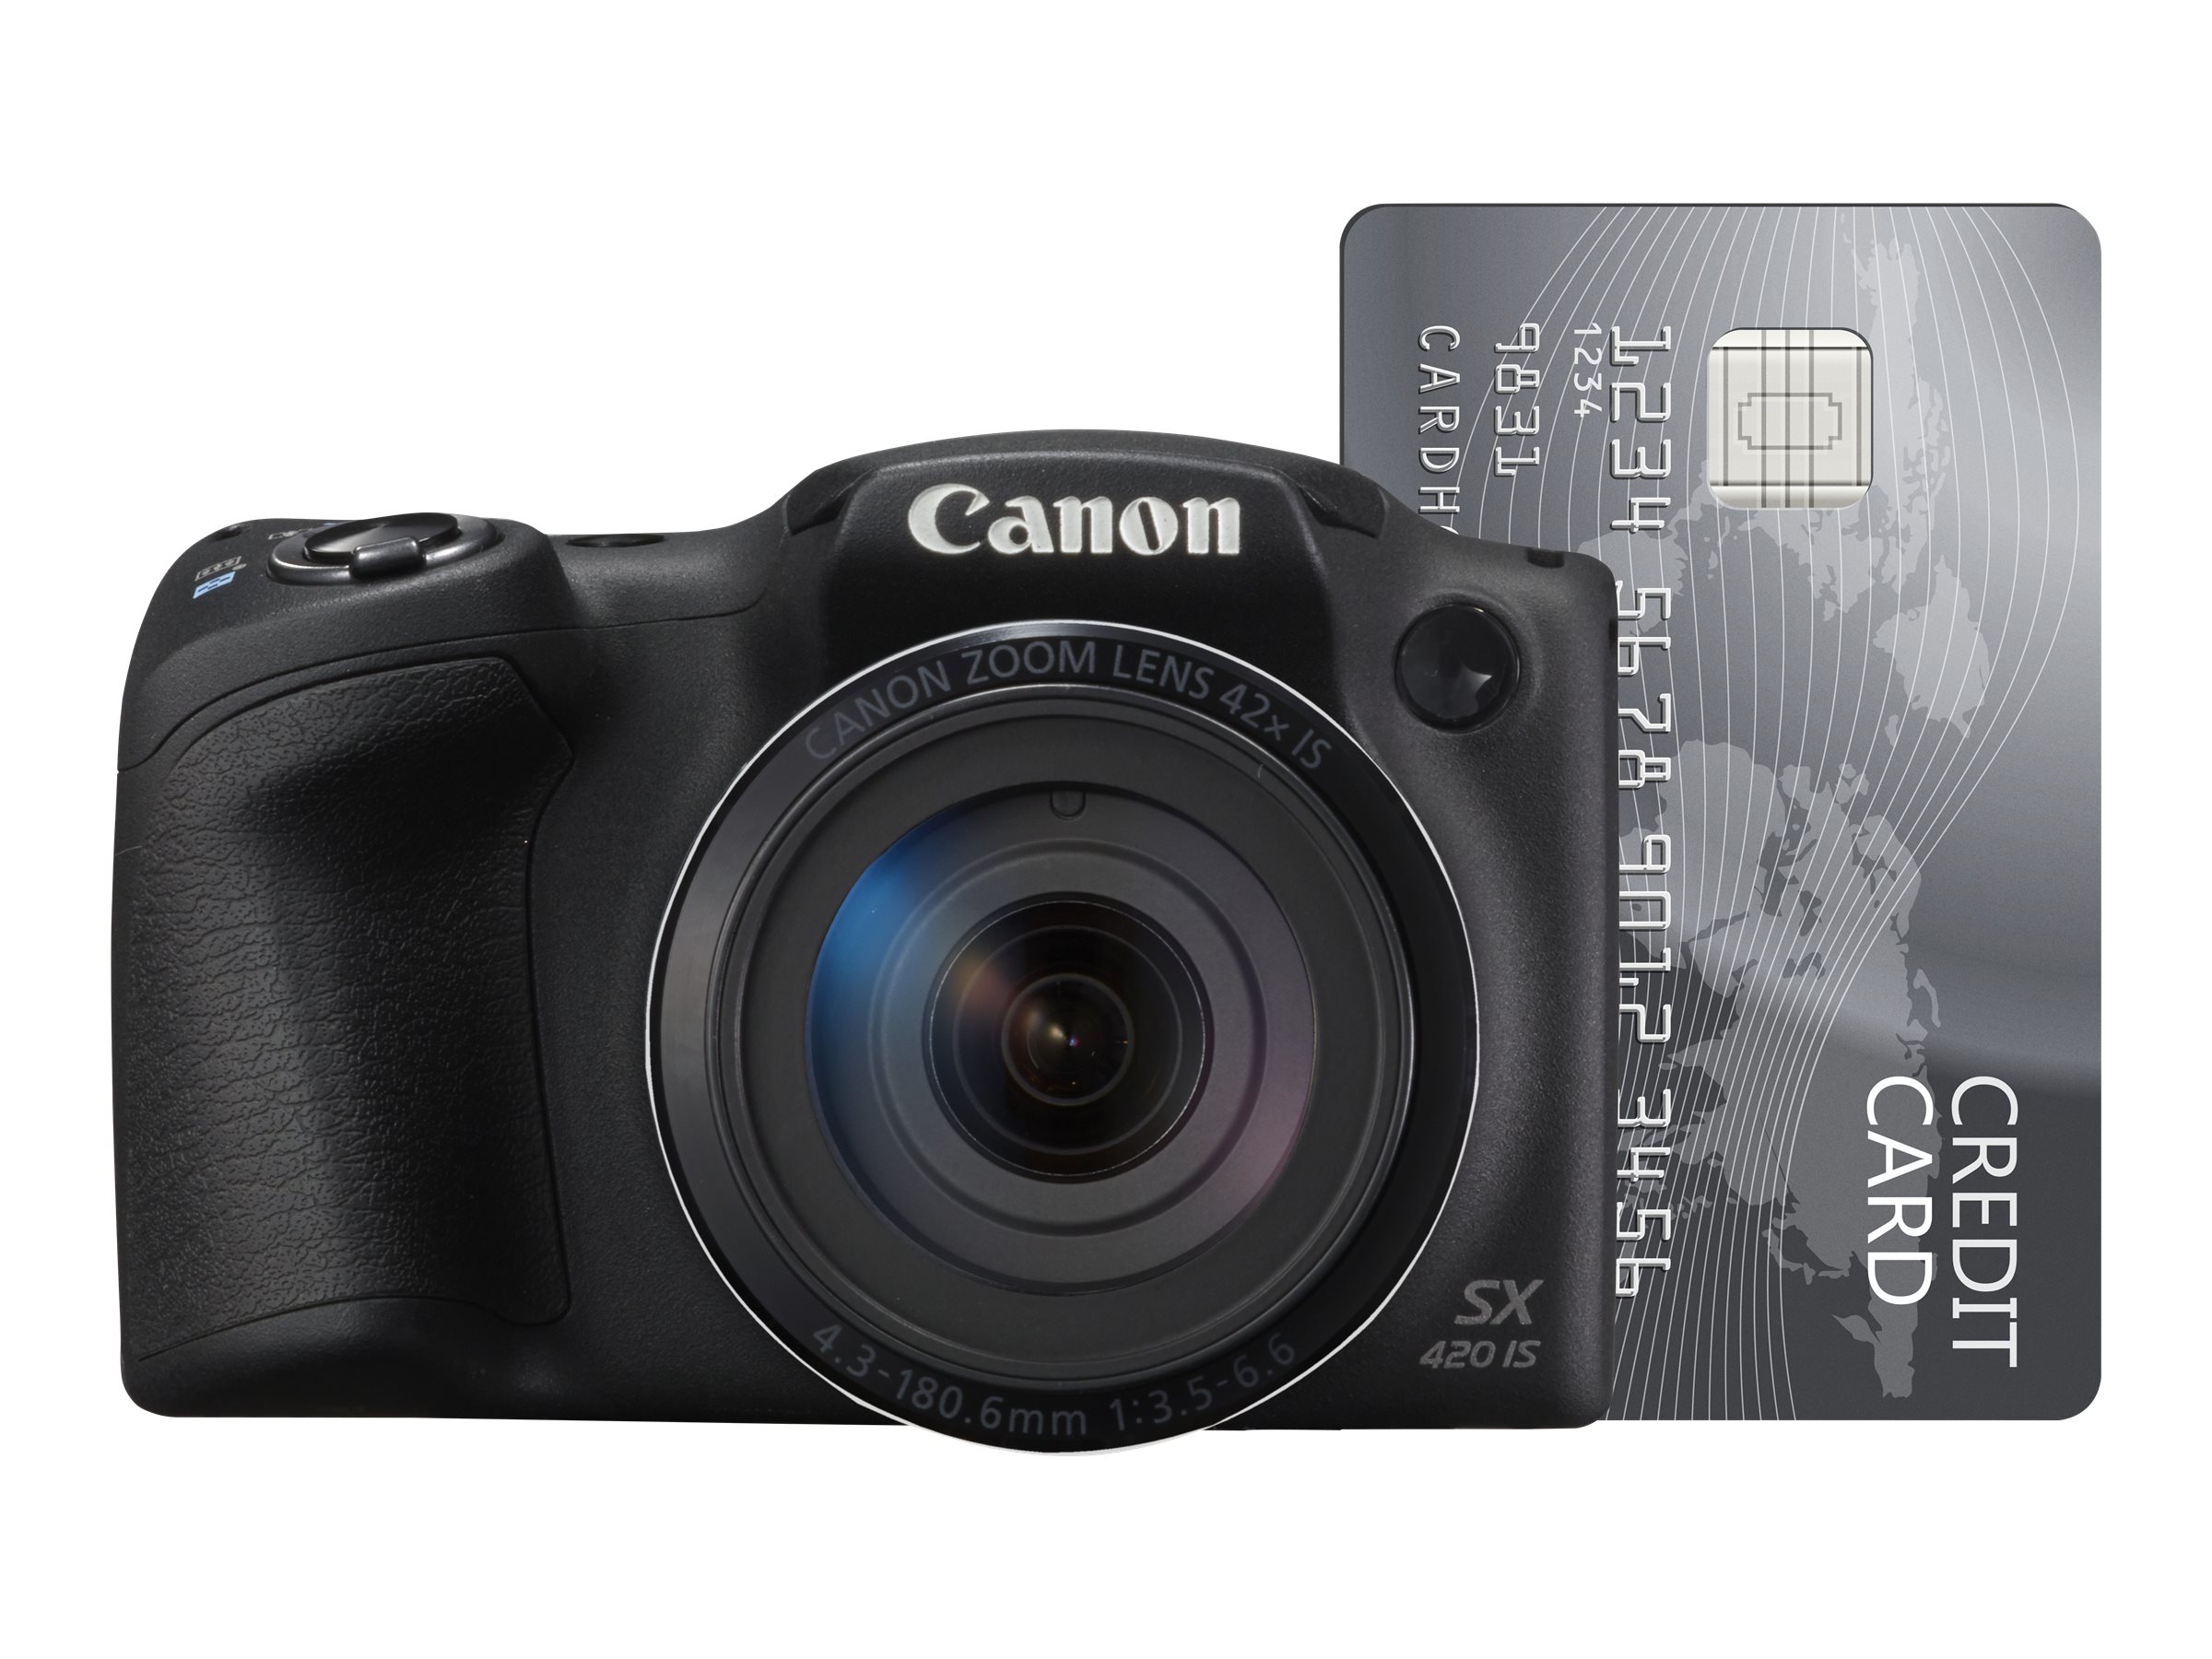 Photography - IXUS 285 HS - Specification - Canon South & Southeast Asia